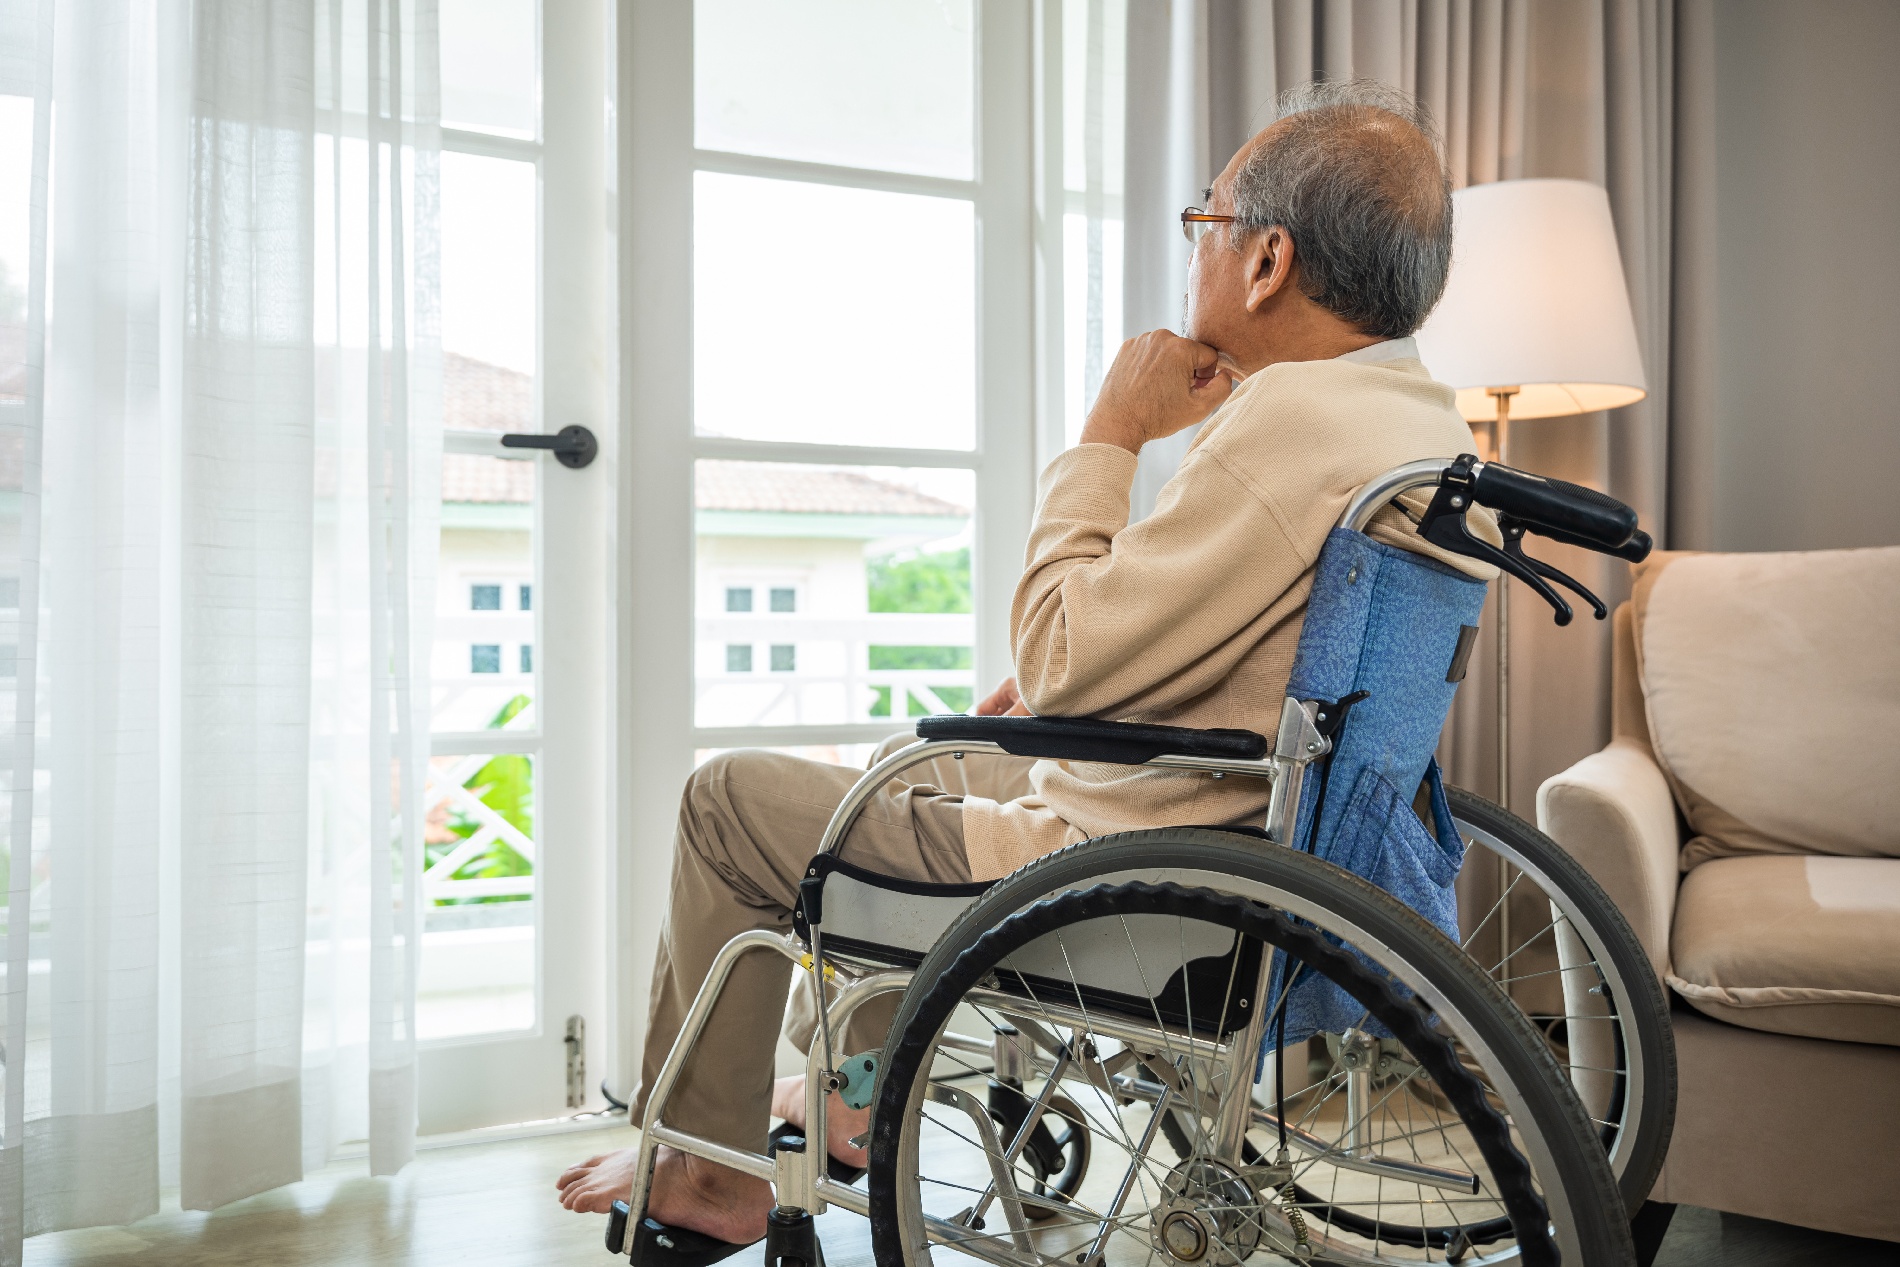 A lonely man in a wheelchair stares out an open window of a high-rise condo.